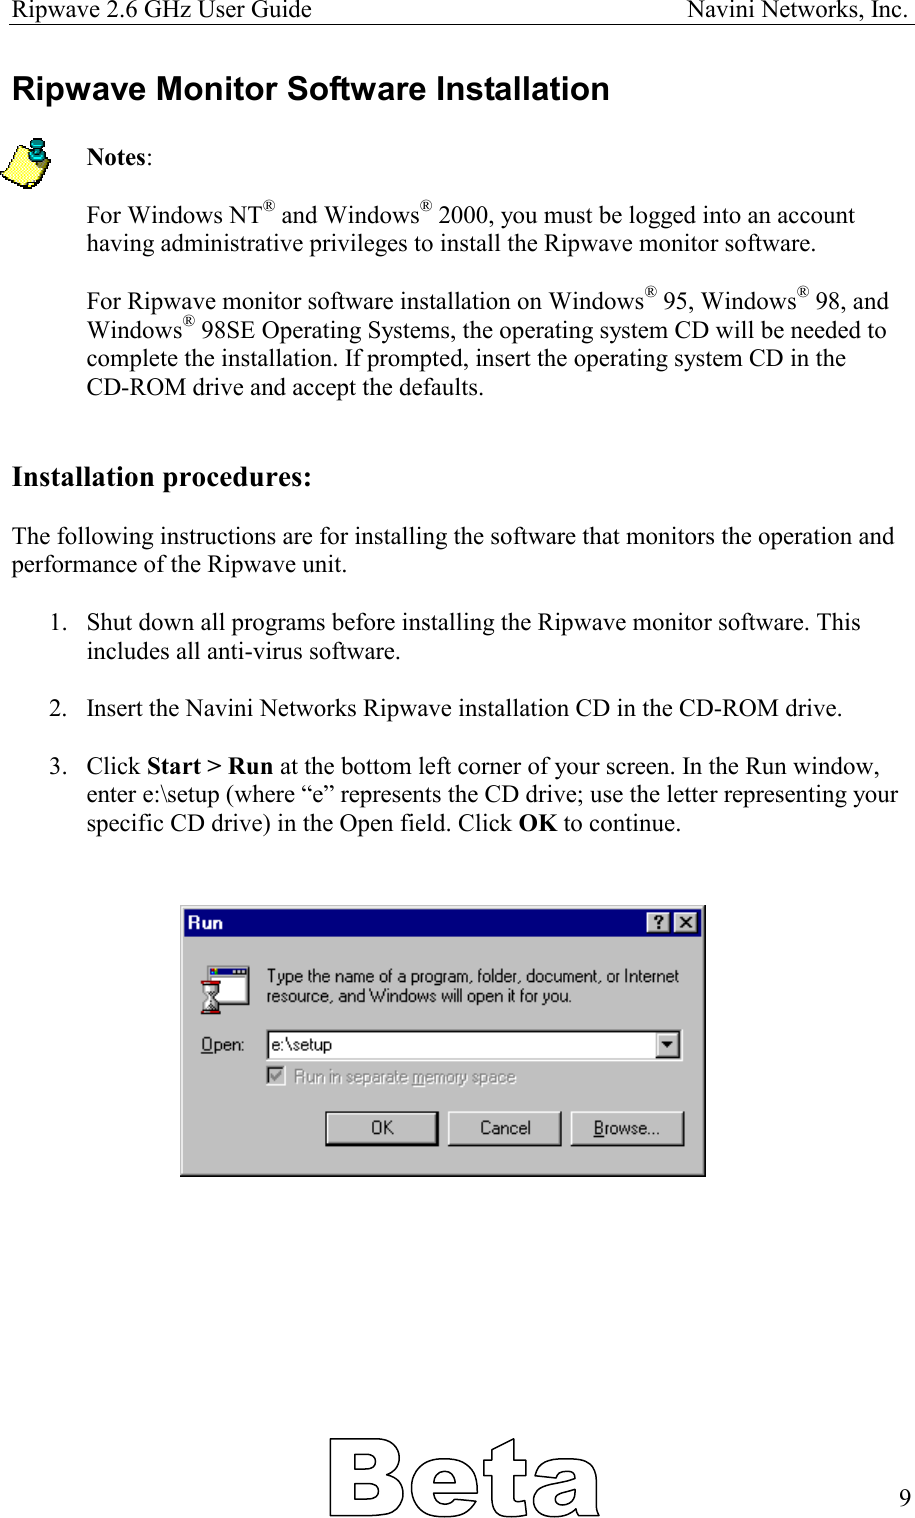 Ripwave 2.6 GHz User Guide                                                            Navini Networks, Inc. Ripwave Monitor Software Installation  Notes:   For Windows NT® and Windows® 2000, you must be logged into an account having administrative privileges to install the Ripwave monitor software.  For Ripwave monitor software installation on Windows® 95, Windows® 98, and Windows® 98SE Operating Systems, the operating system CD will be needed to complete the installation. If prompted, insert the operating system CD in the  CD-ROM drive and accept the defaults.   Installation procedures:  The following instructions are for installing the software that monitors the operation and performance of the Ripwave unit.   1.  Shut down all programs before installing the Ripwave monitor software. This includes all anti-virus software.  2.  Insert the Navini Networks Ripwave installation CD in the CD-ROM drive.  3. Click Start &gt; Run at the bottom left corner of your screen. In the Run window, enter e:\setup (where “e” represents the CD drive; use the letter representing your specific CD drive) in the Open field. Click OK to continue.                 9